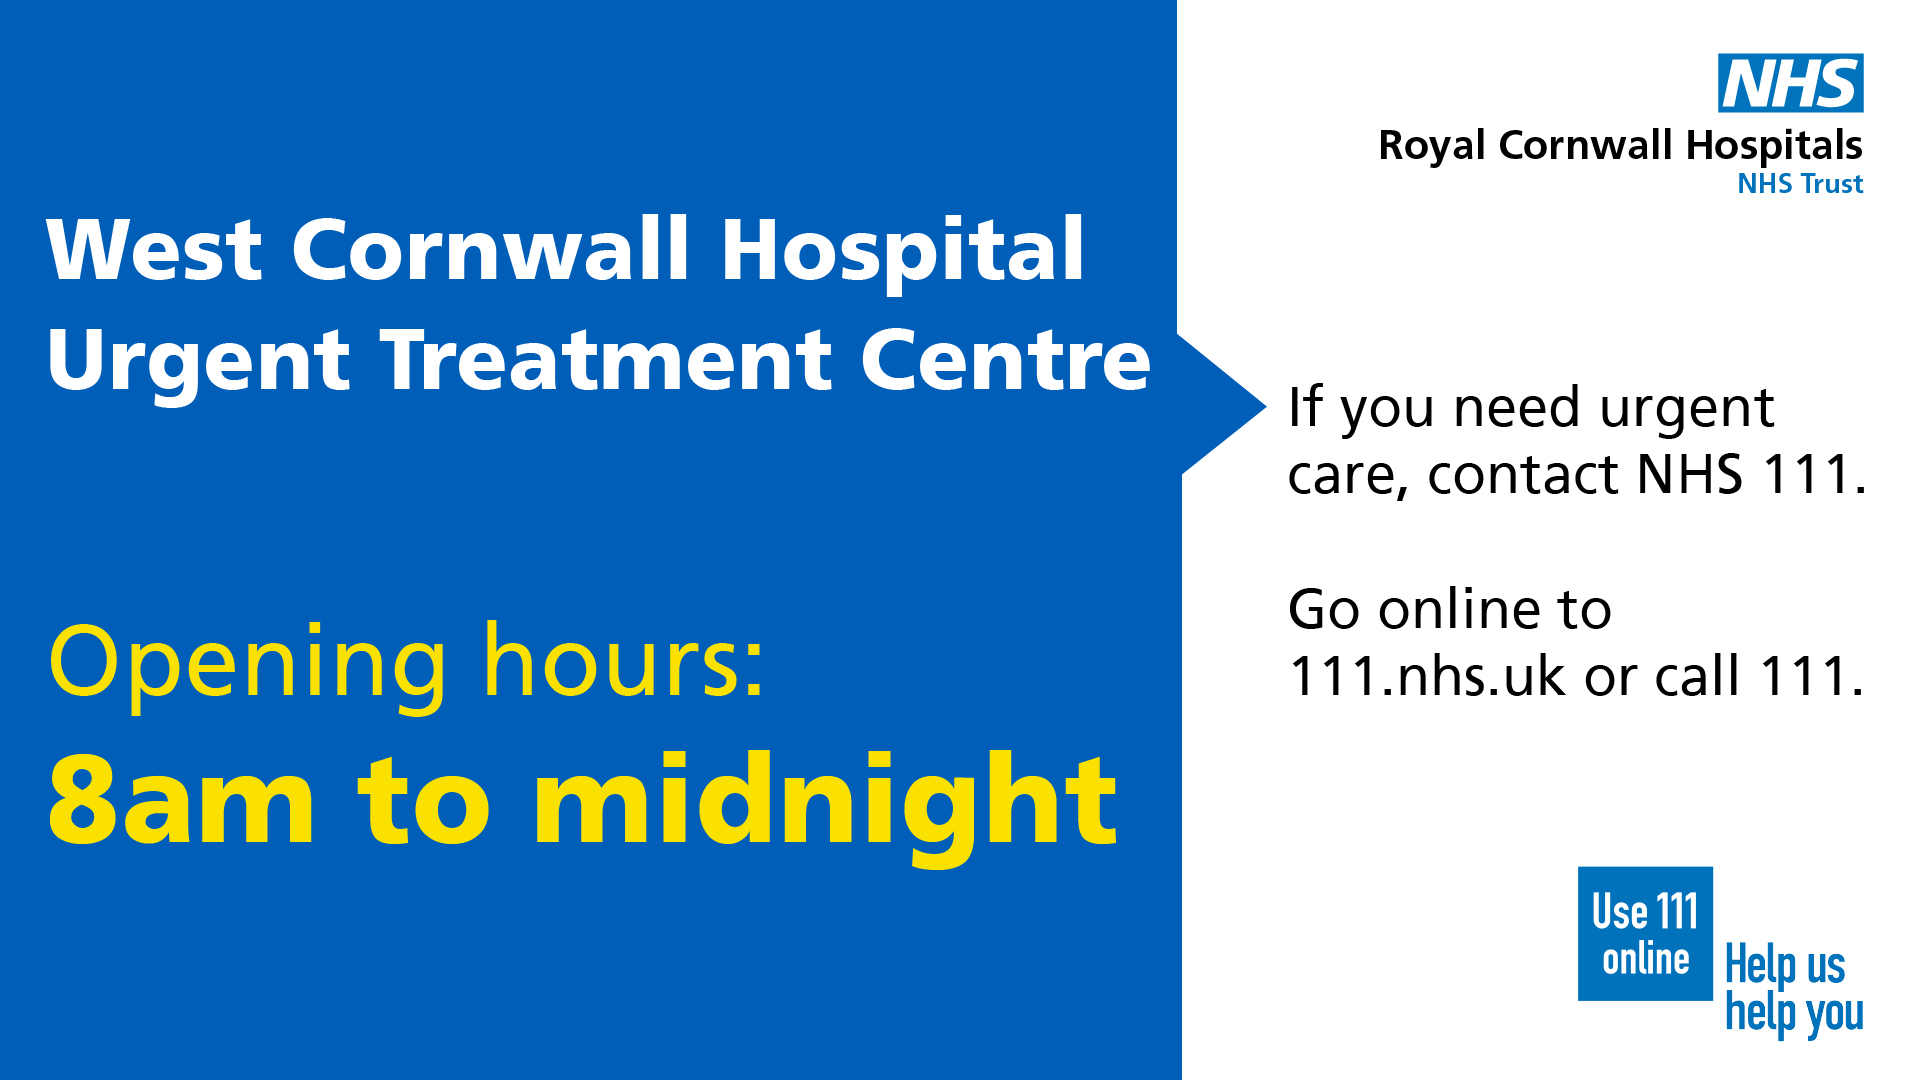 West Cornwall Hospital Urgent Treatment Centre opening hours: 8am to midnight.